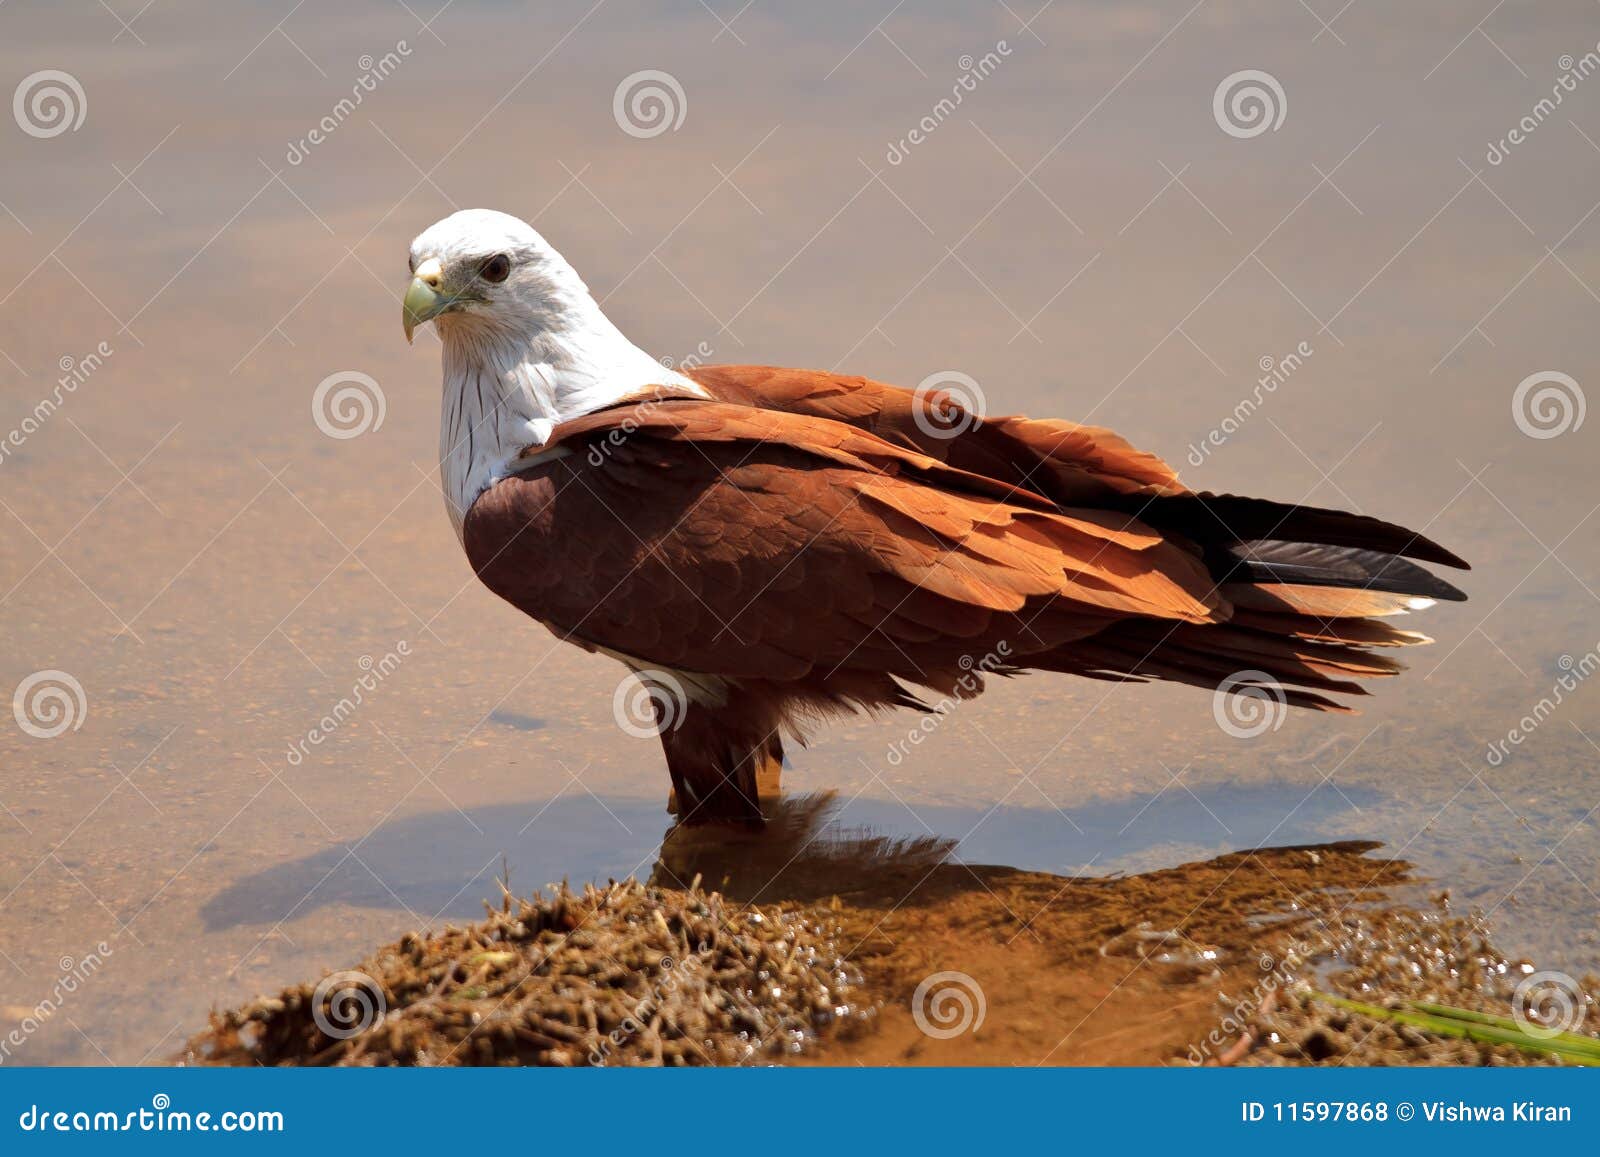 eagle wading in water